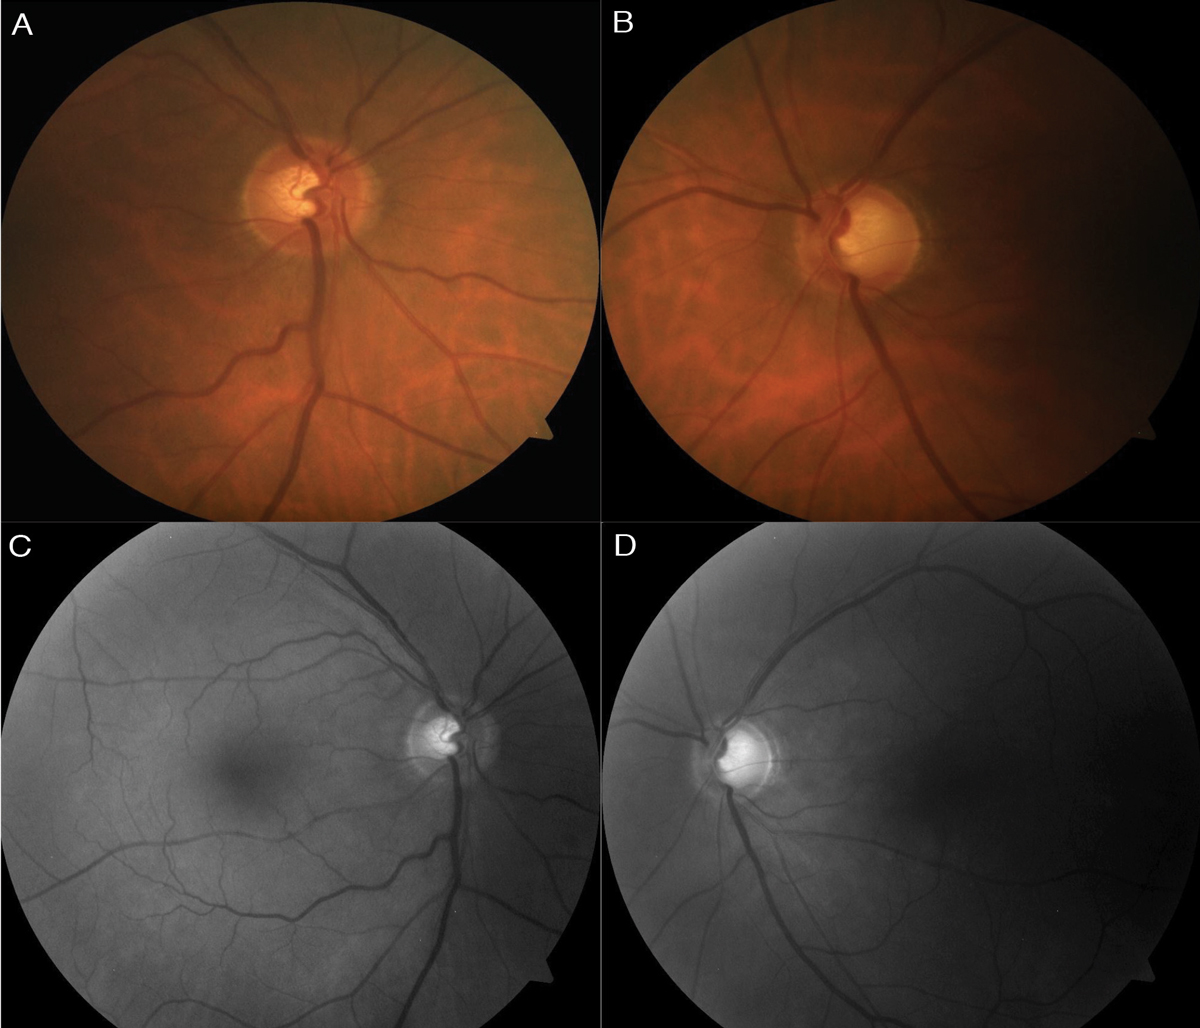 Fig. 1. Color fundus photo (A) of the right optic nerve shows mild superior thinning, while the left (B) shows noticeable superior, temporal and inferior thinning. Red-free photos show loss of the bright RNFL pattern superiorly in the right (C) and both superiorly and inferiorly, extending temporal, in the left (D). 